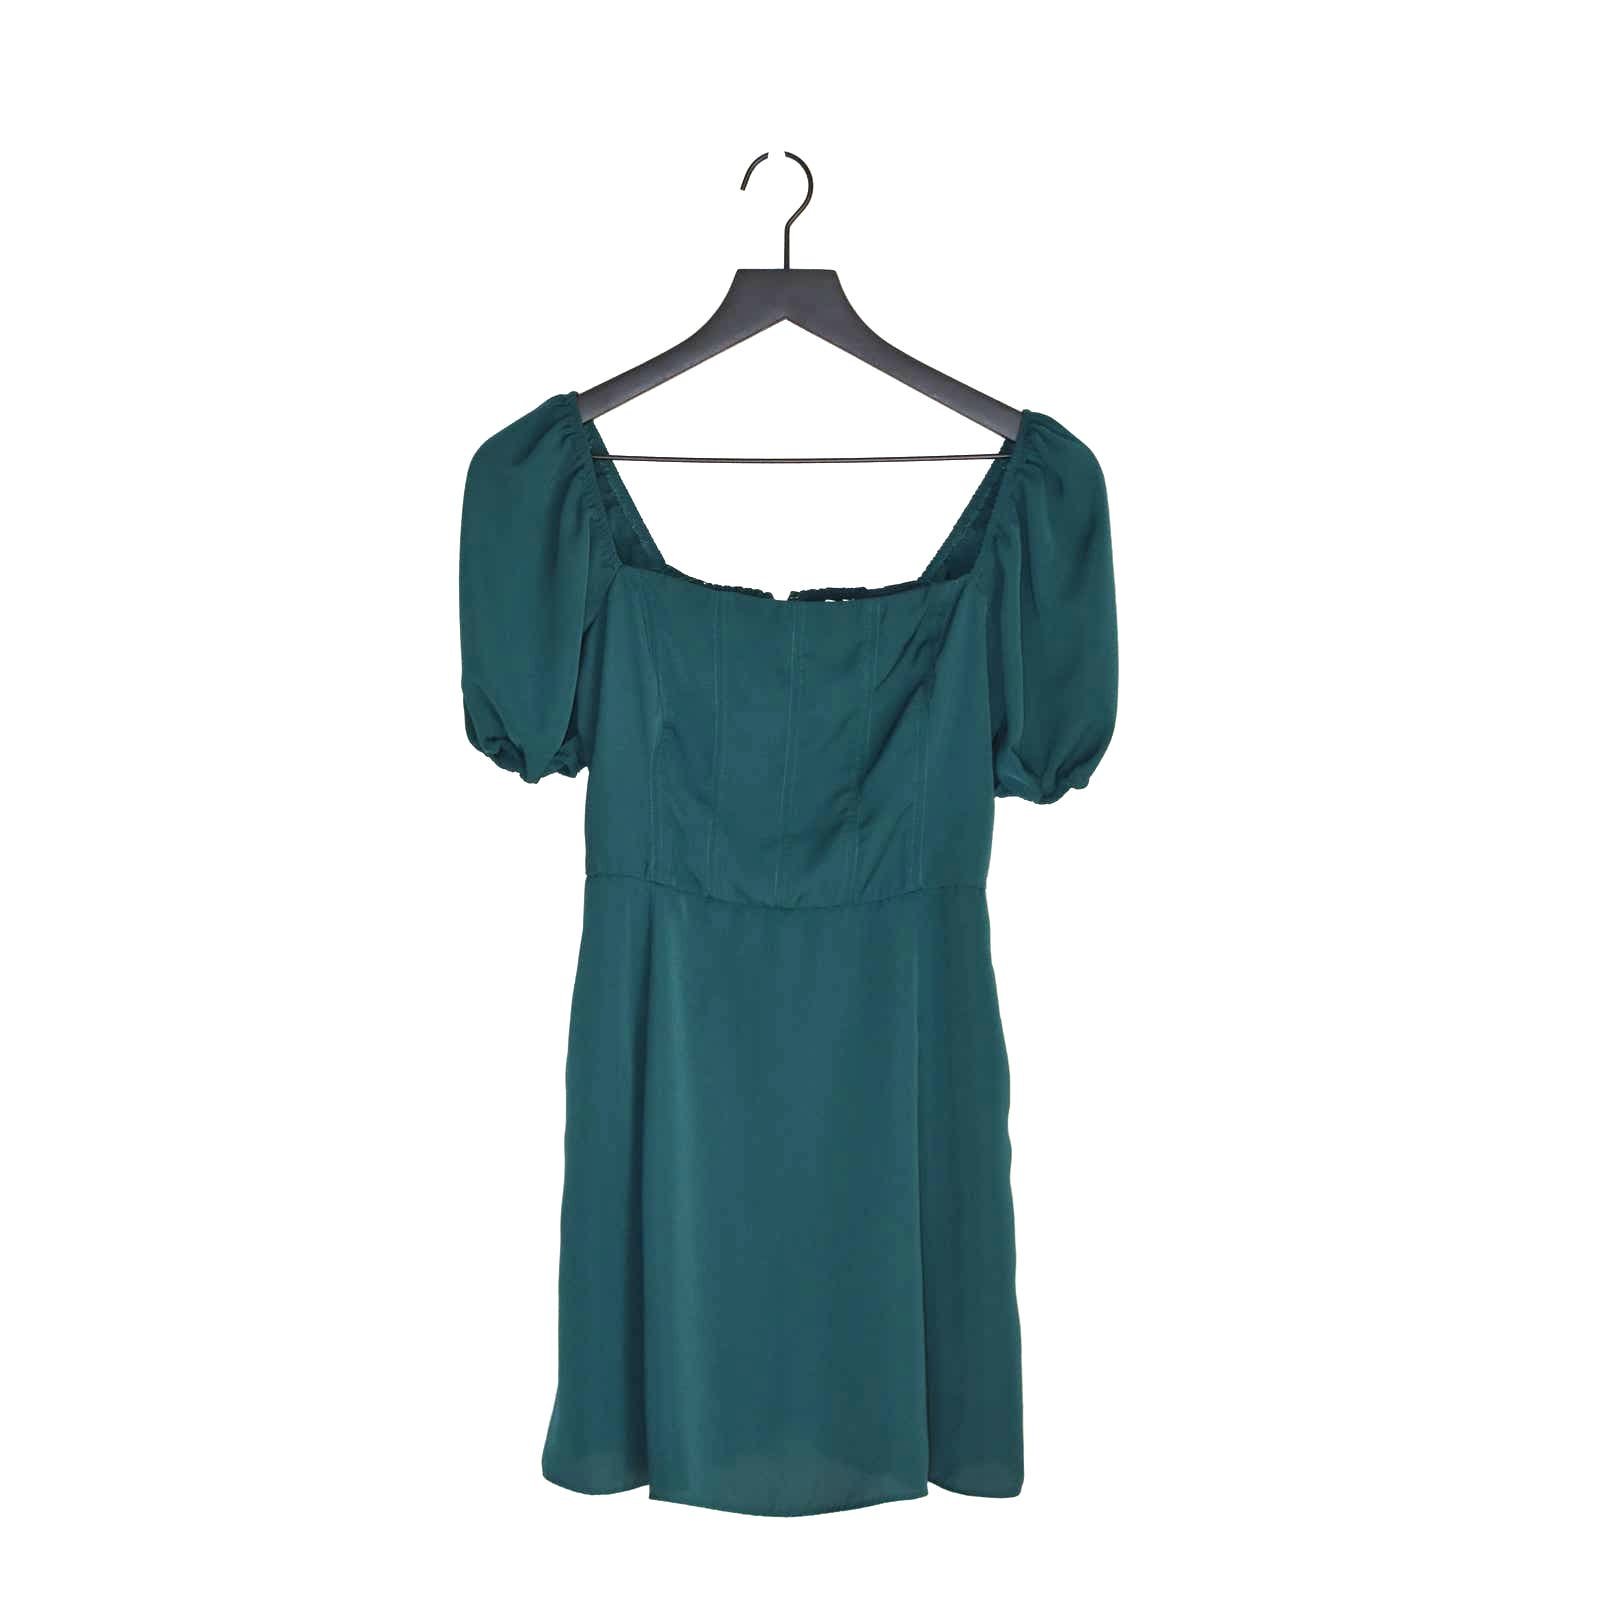 reasonable price Abercrombie & Fitch Green Short Sleeve Dress Size S iiYiSsbR0 no tax